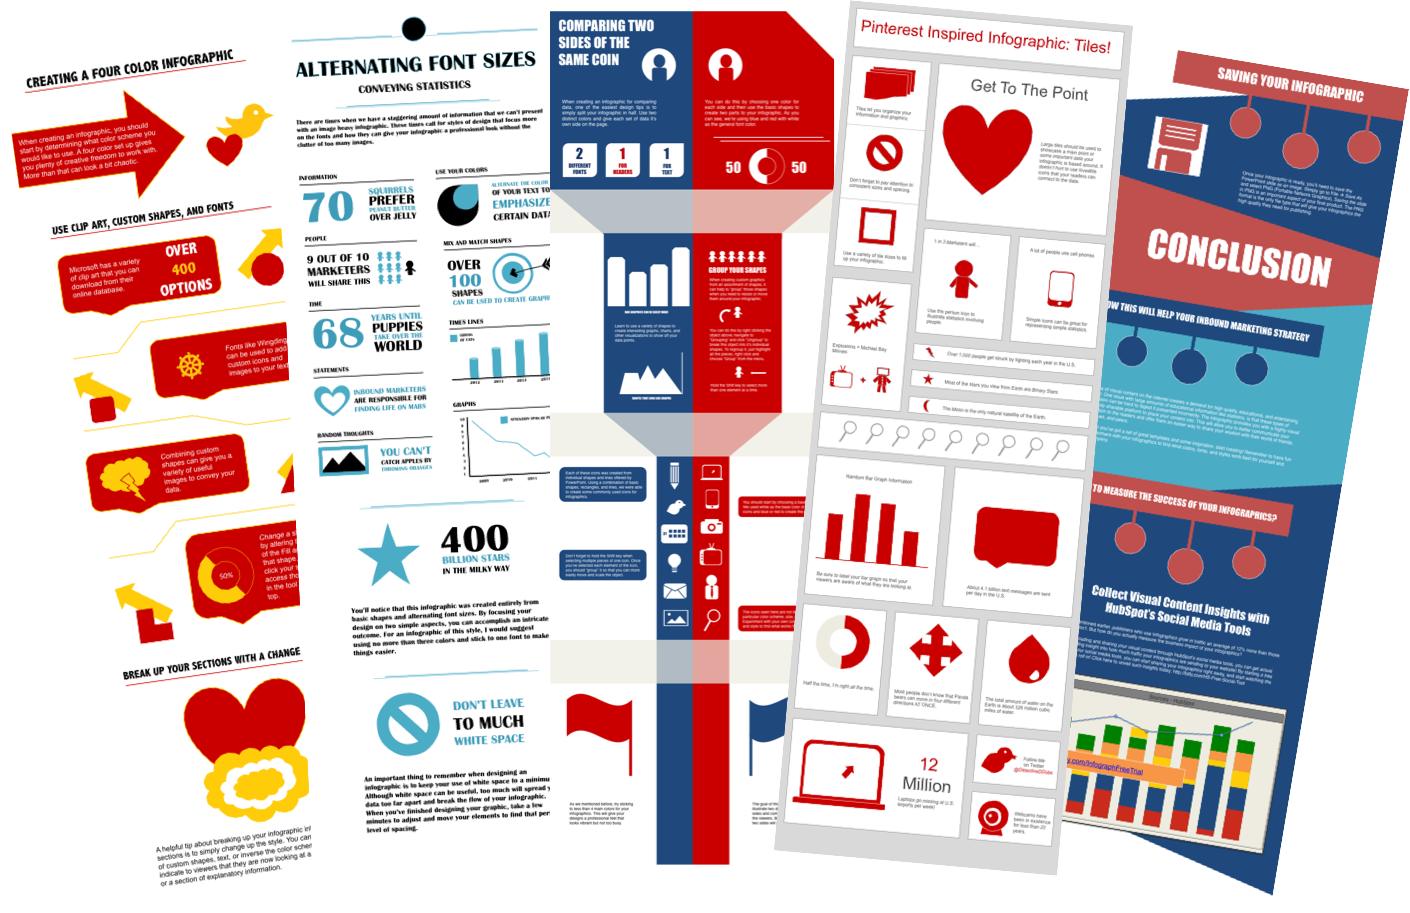 16 Free Infographic Templates For PowerPoint Images